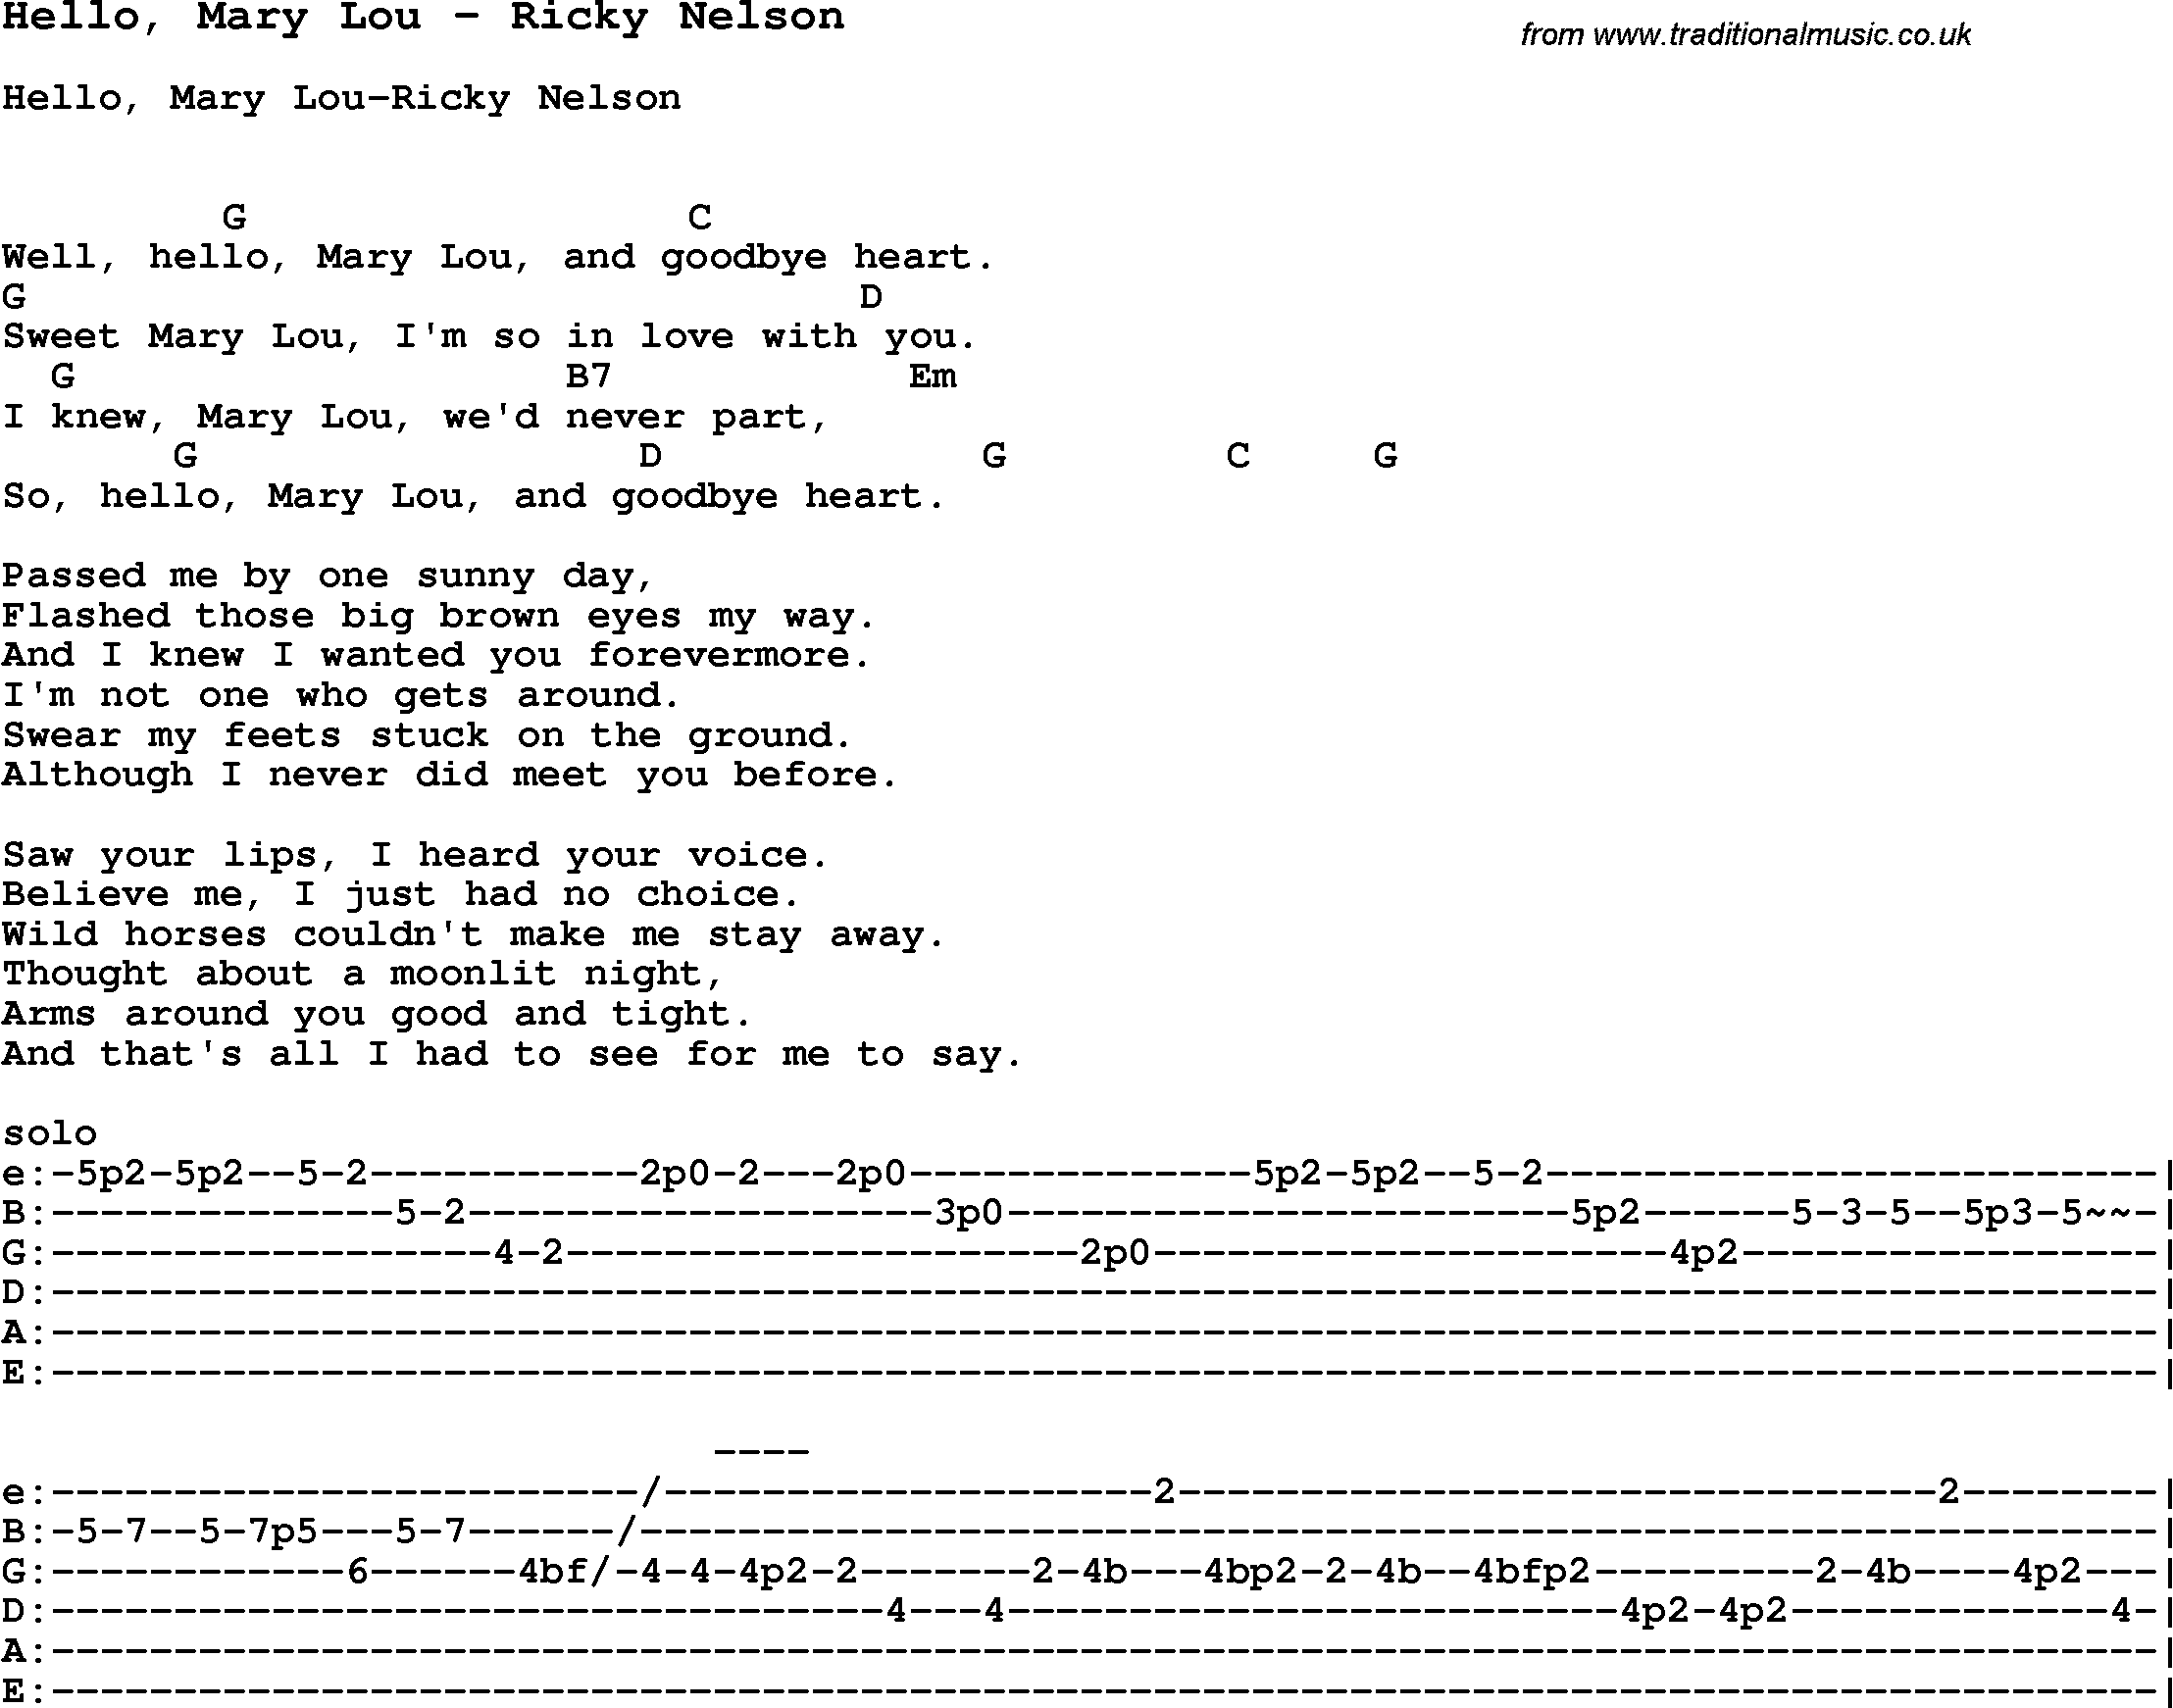 Song Hello, Mary Lou by Ricky Nelson, with lyrics for vocal performance and accompaniment chords for Ukulele, Guitar Banjo etc.